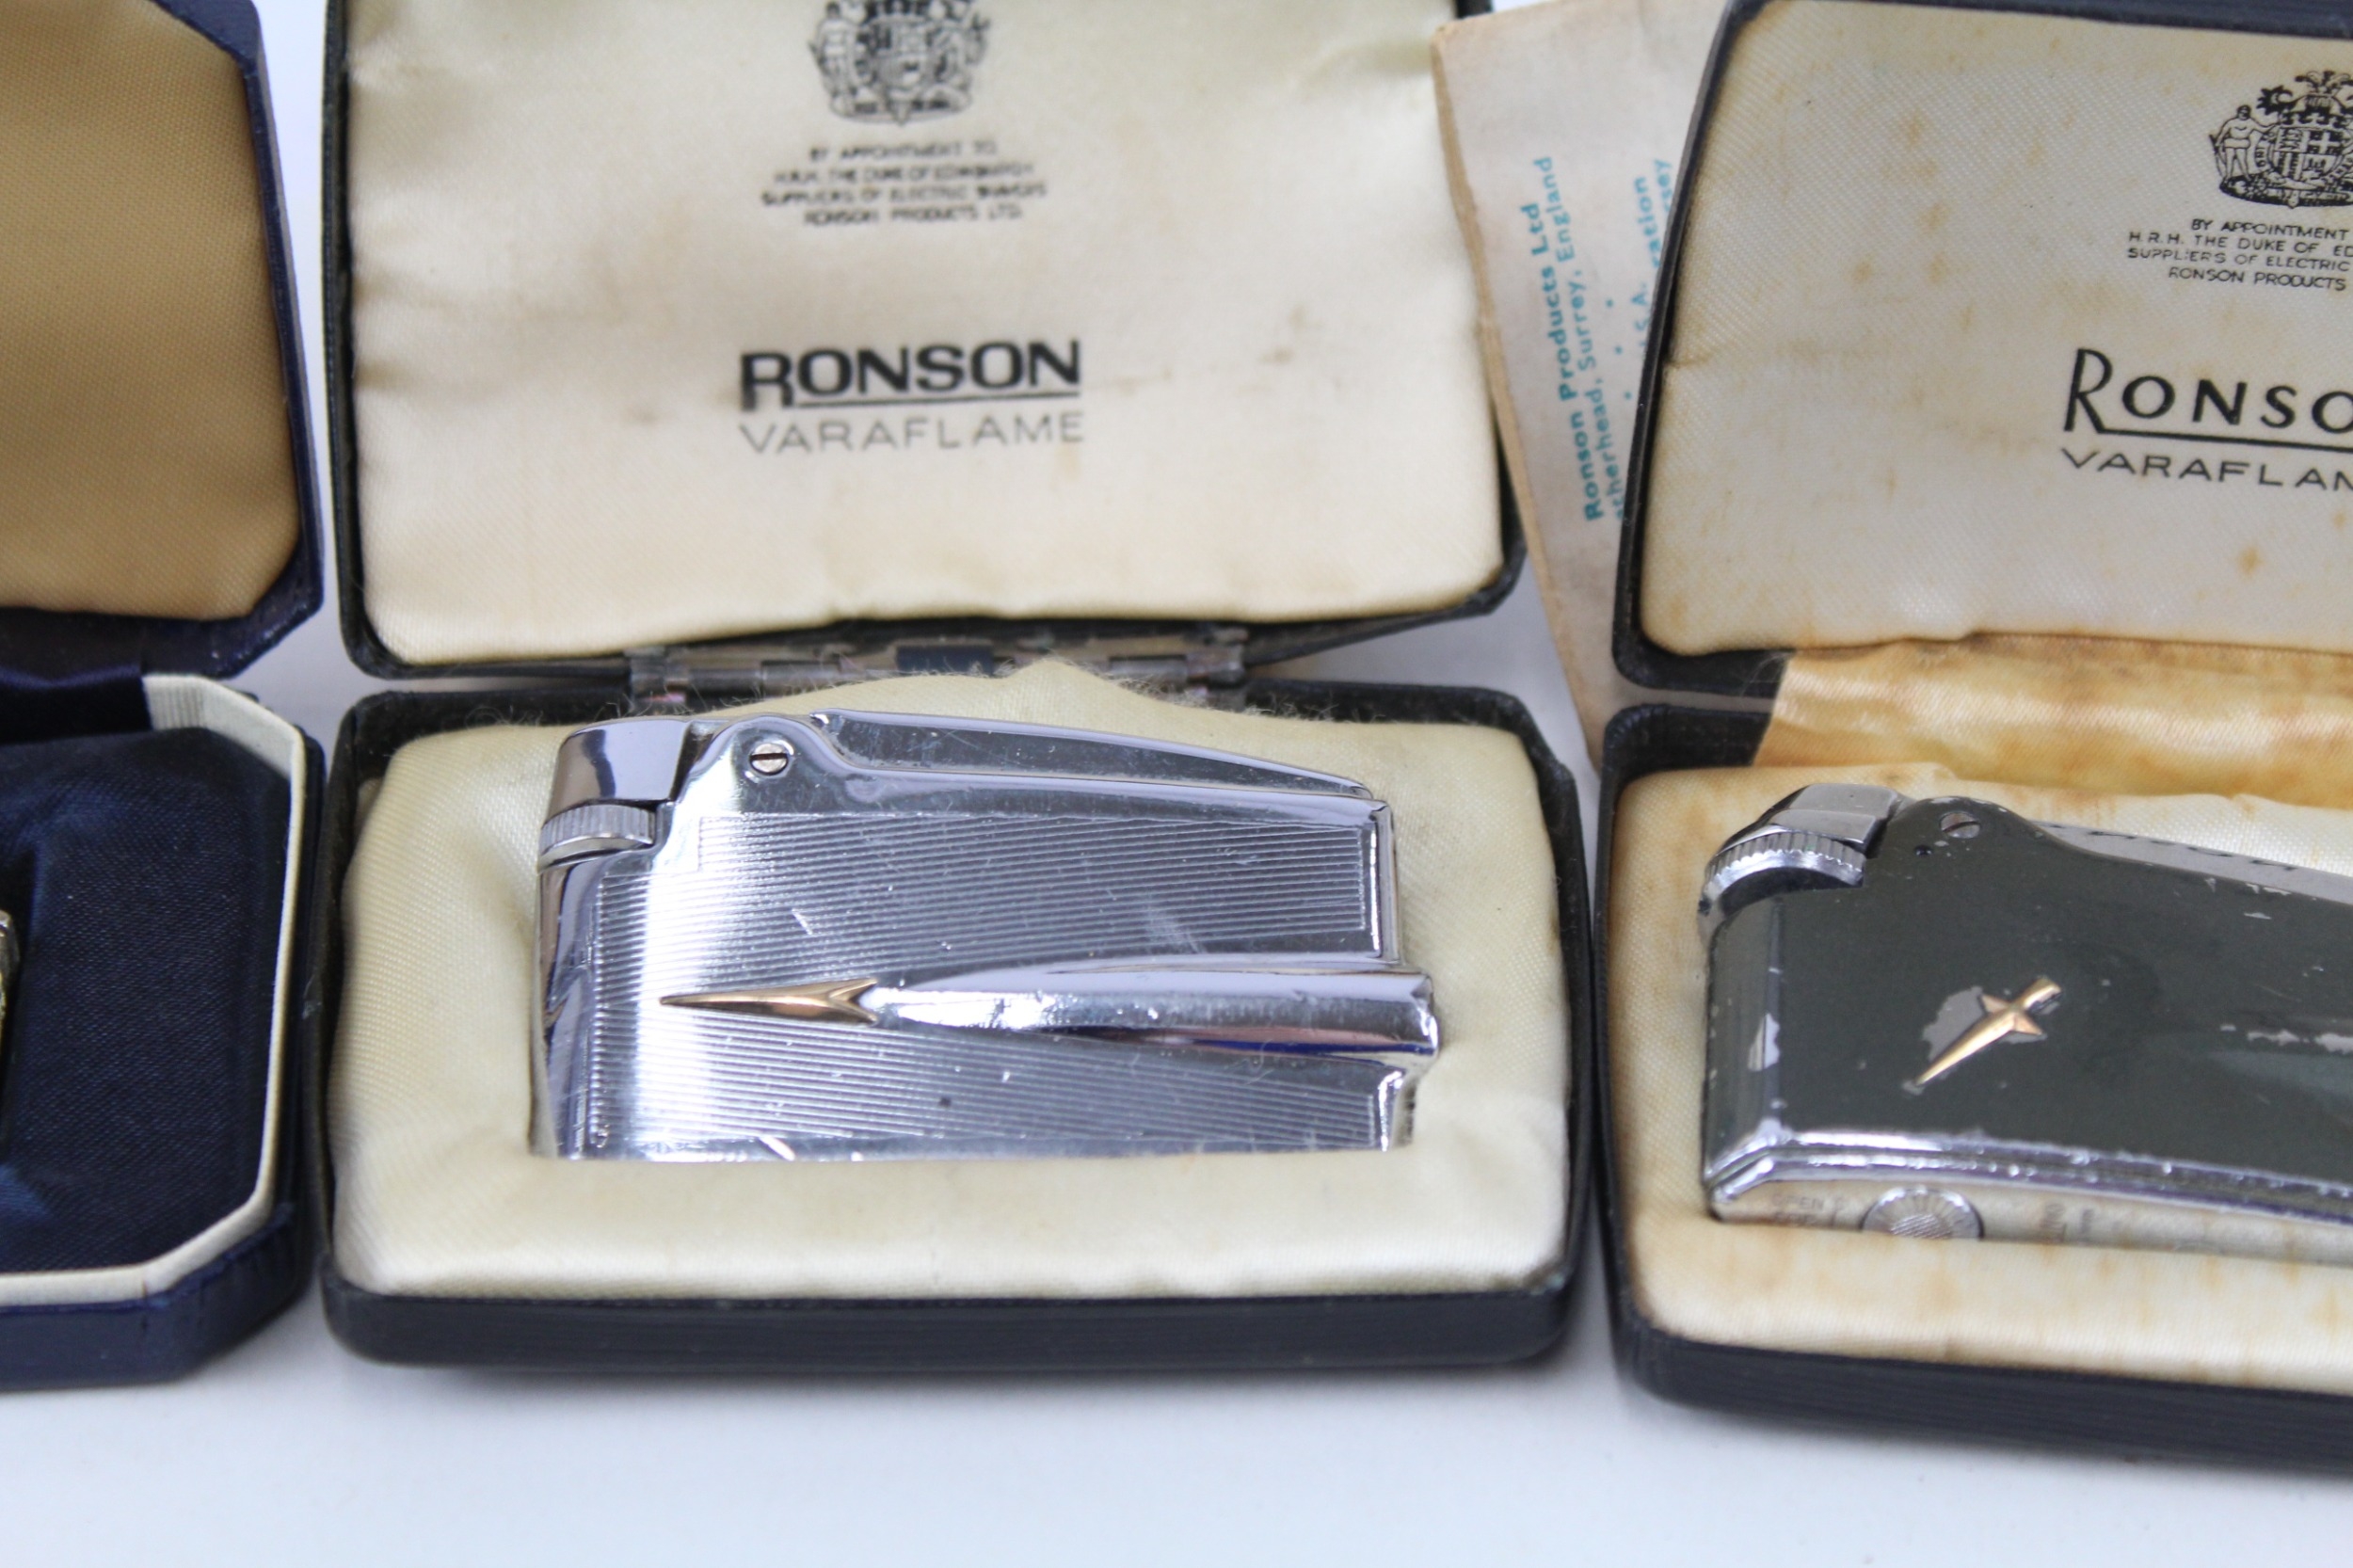 Boxed Vintage Ronson Lighters, Varaflame, Box Contents, Assorted, Etc x 7 - Image 5 of 6